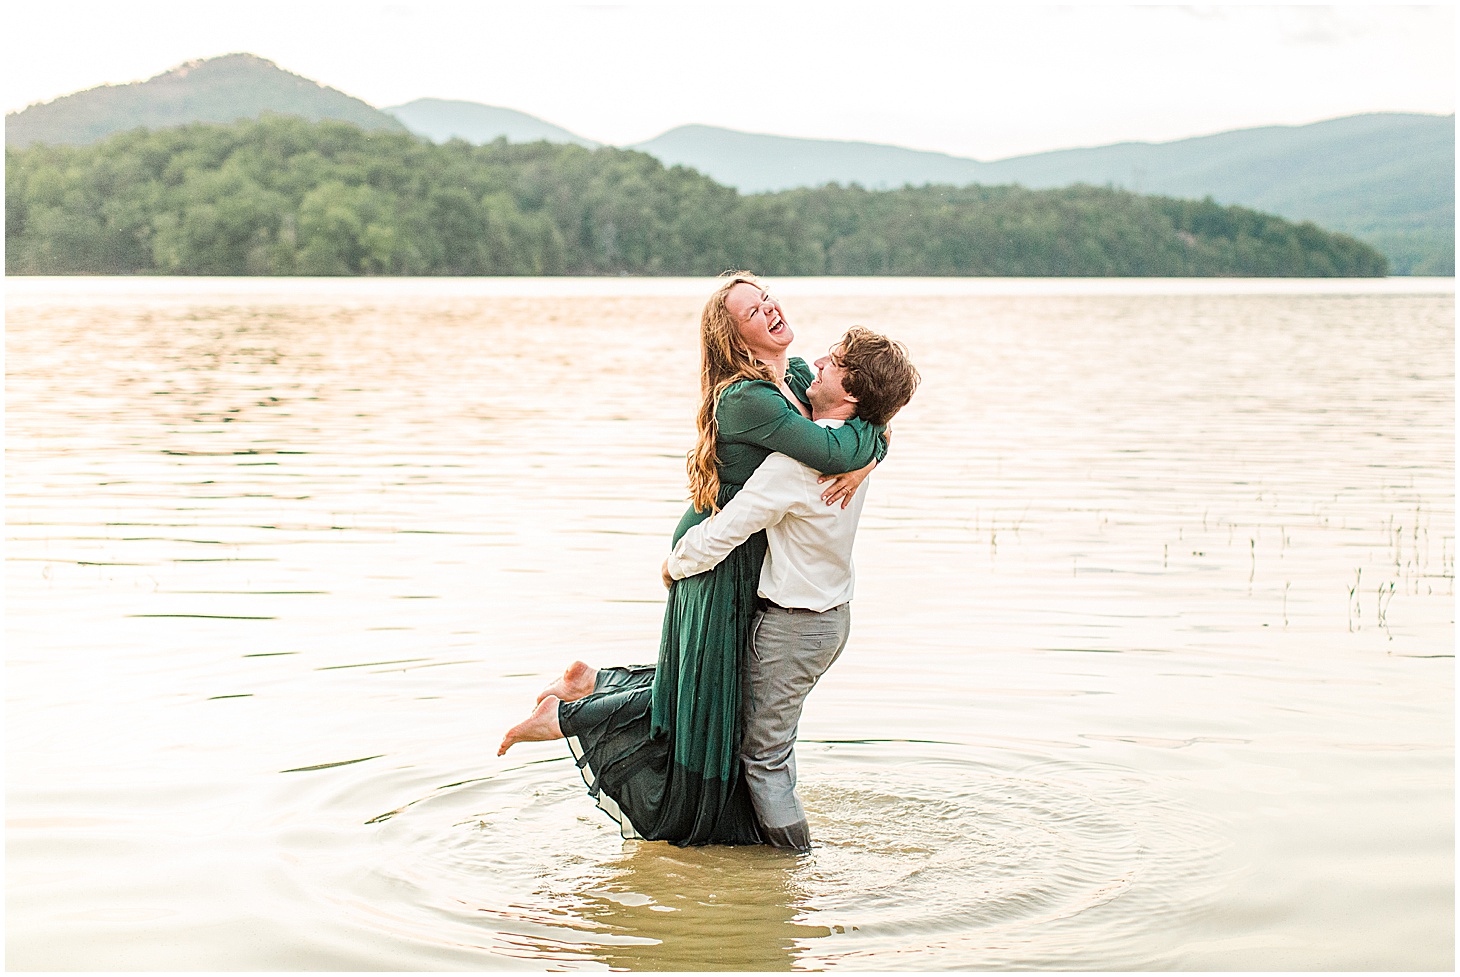 carvinscoveengagementsession_roanokeengagementsession_carvinscove_virginiawedding_virginiaweddingphotographer_vaweddingphotographer_photo_0079.jpg